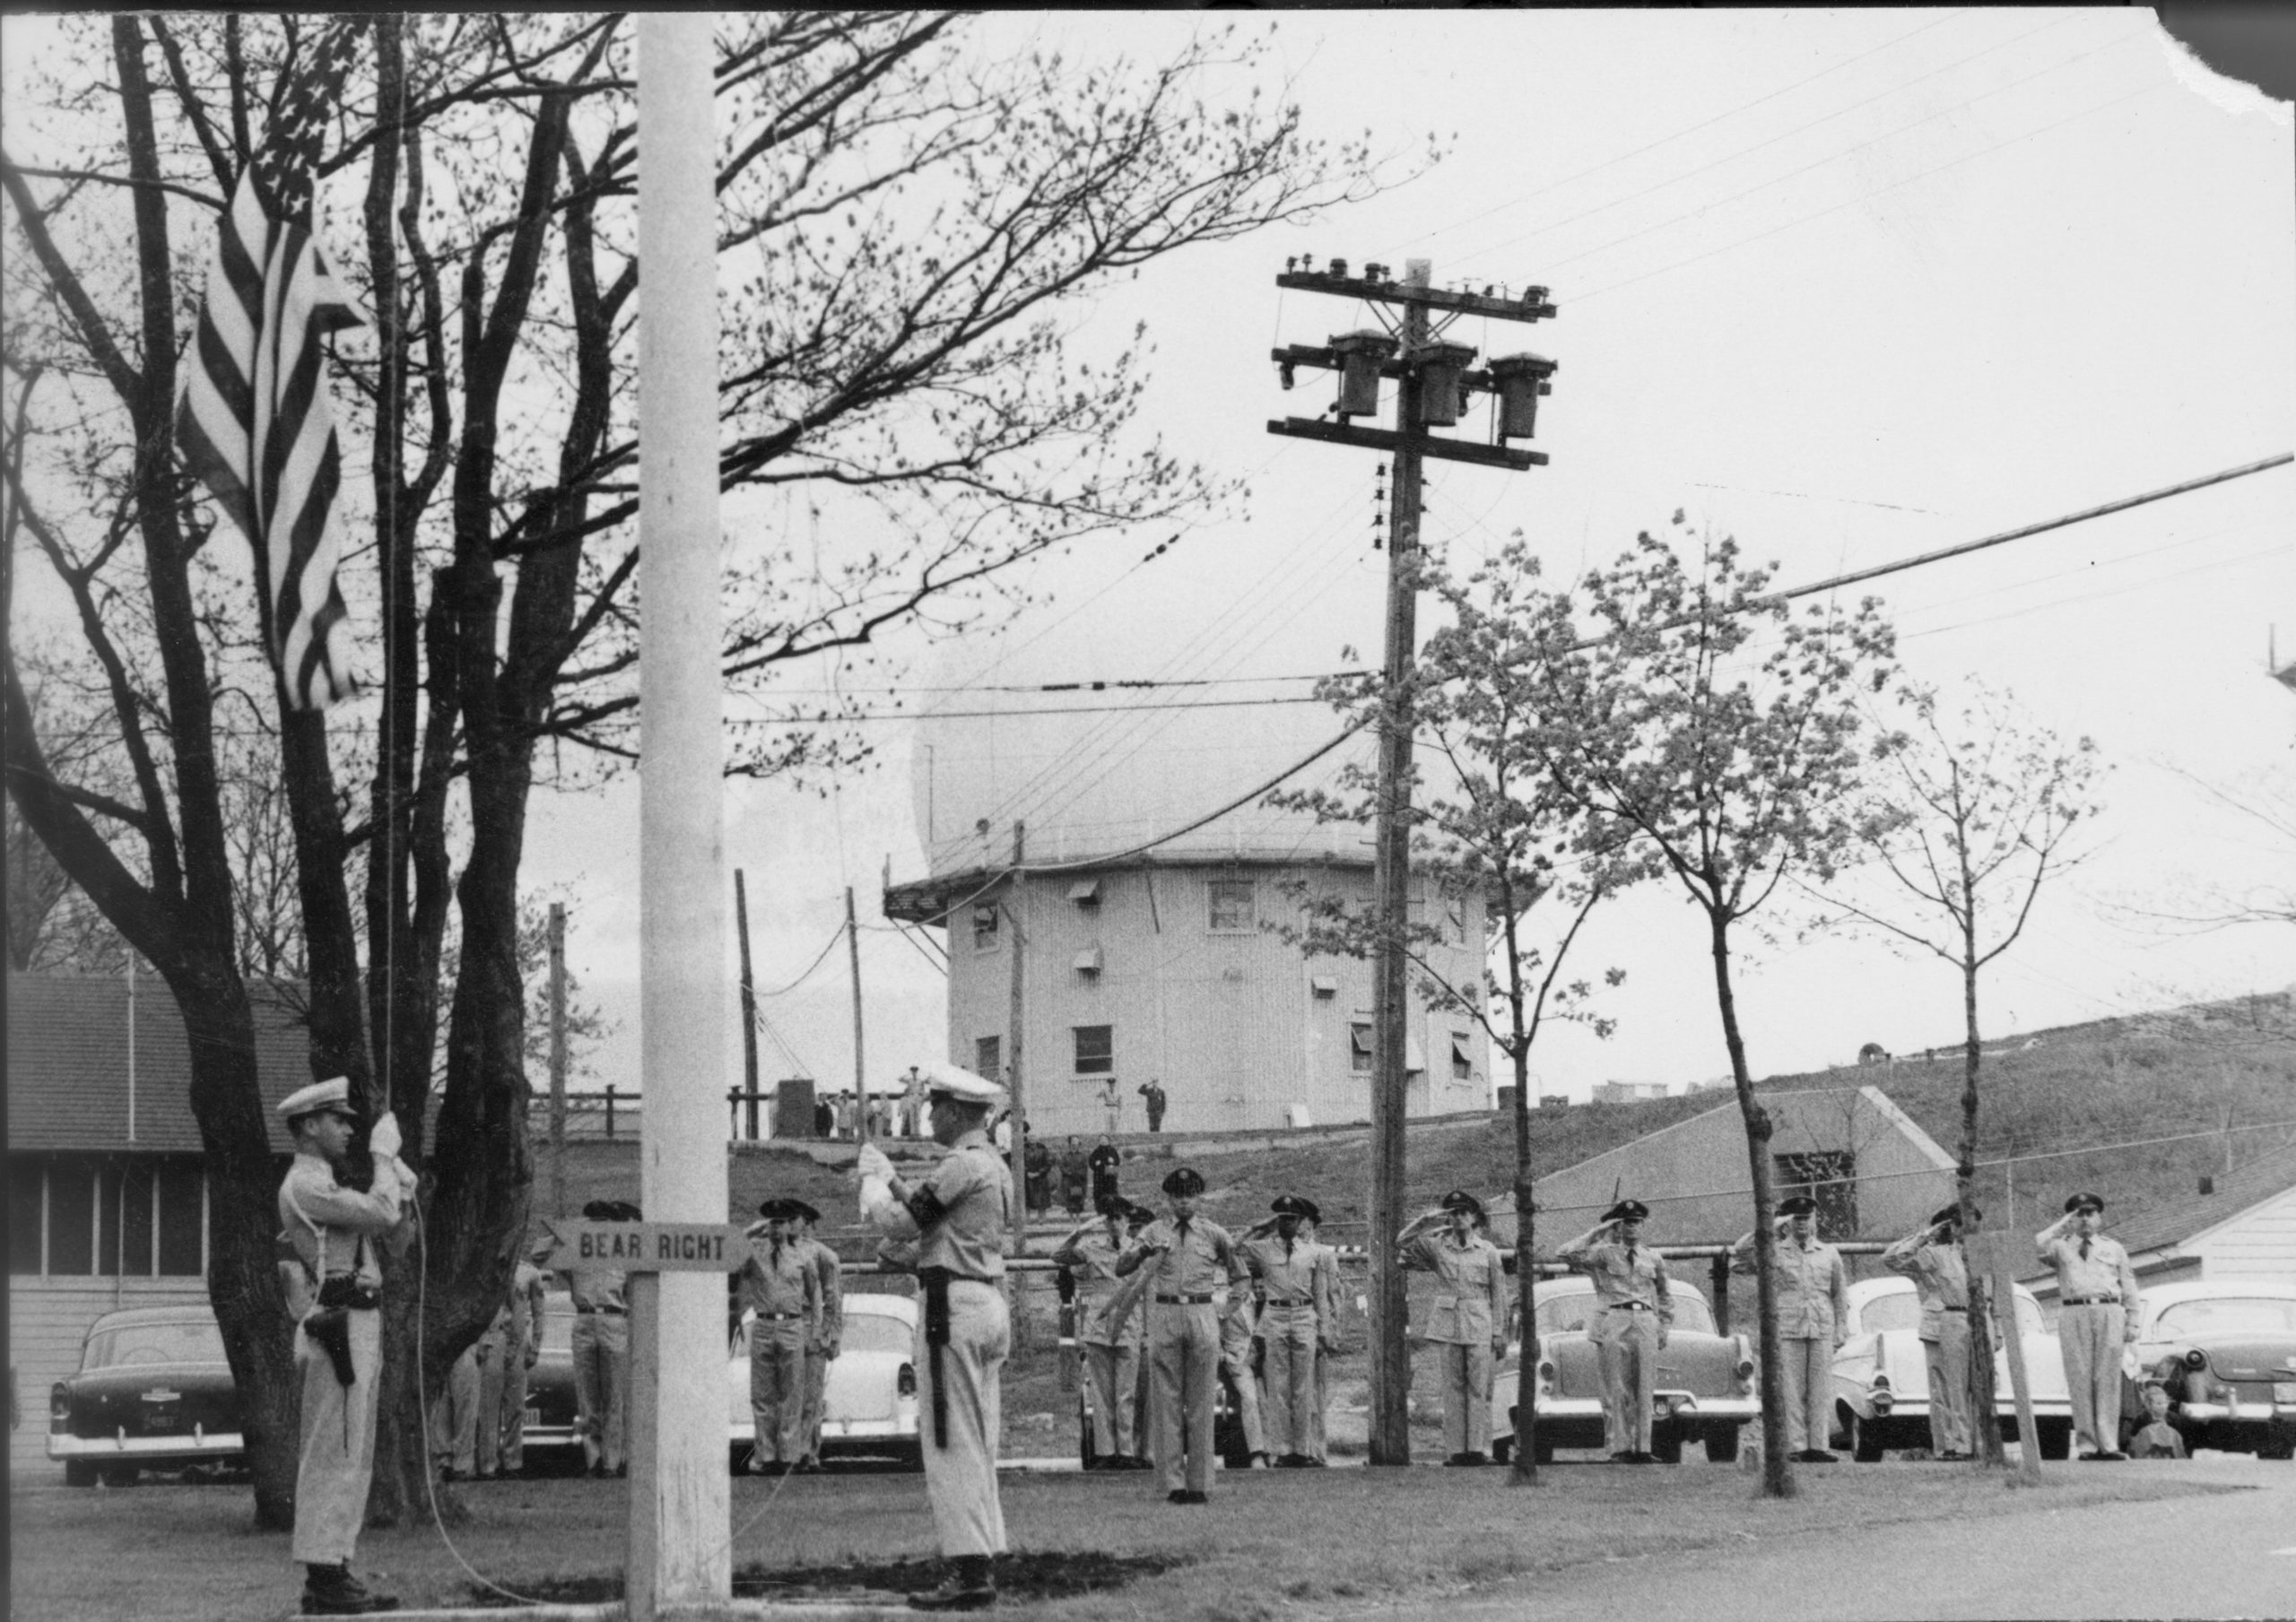 Camp Hero Montauk was home to the 773rd Radar Squadron. Pictured is the base and the squadron in 1958.